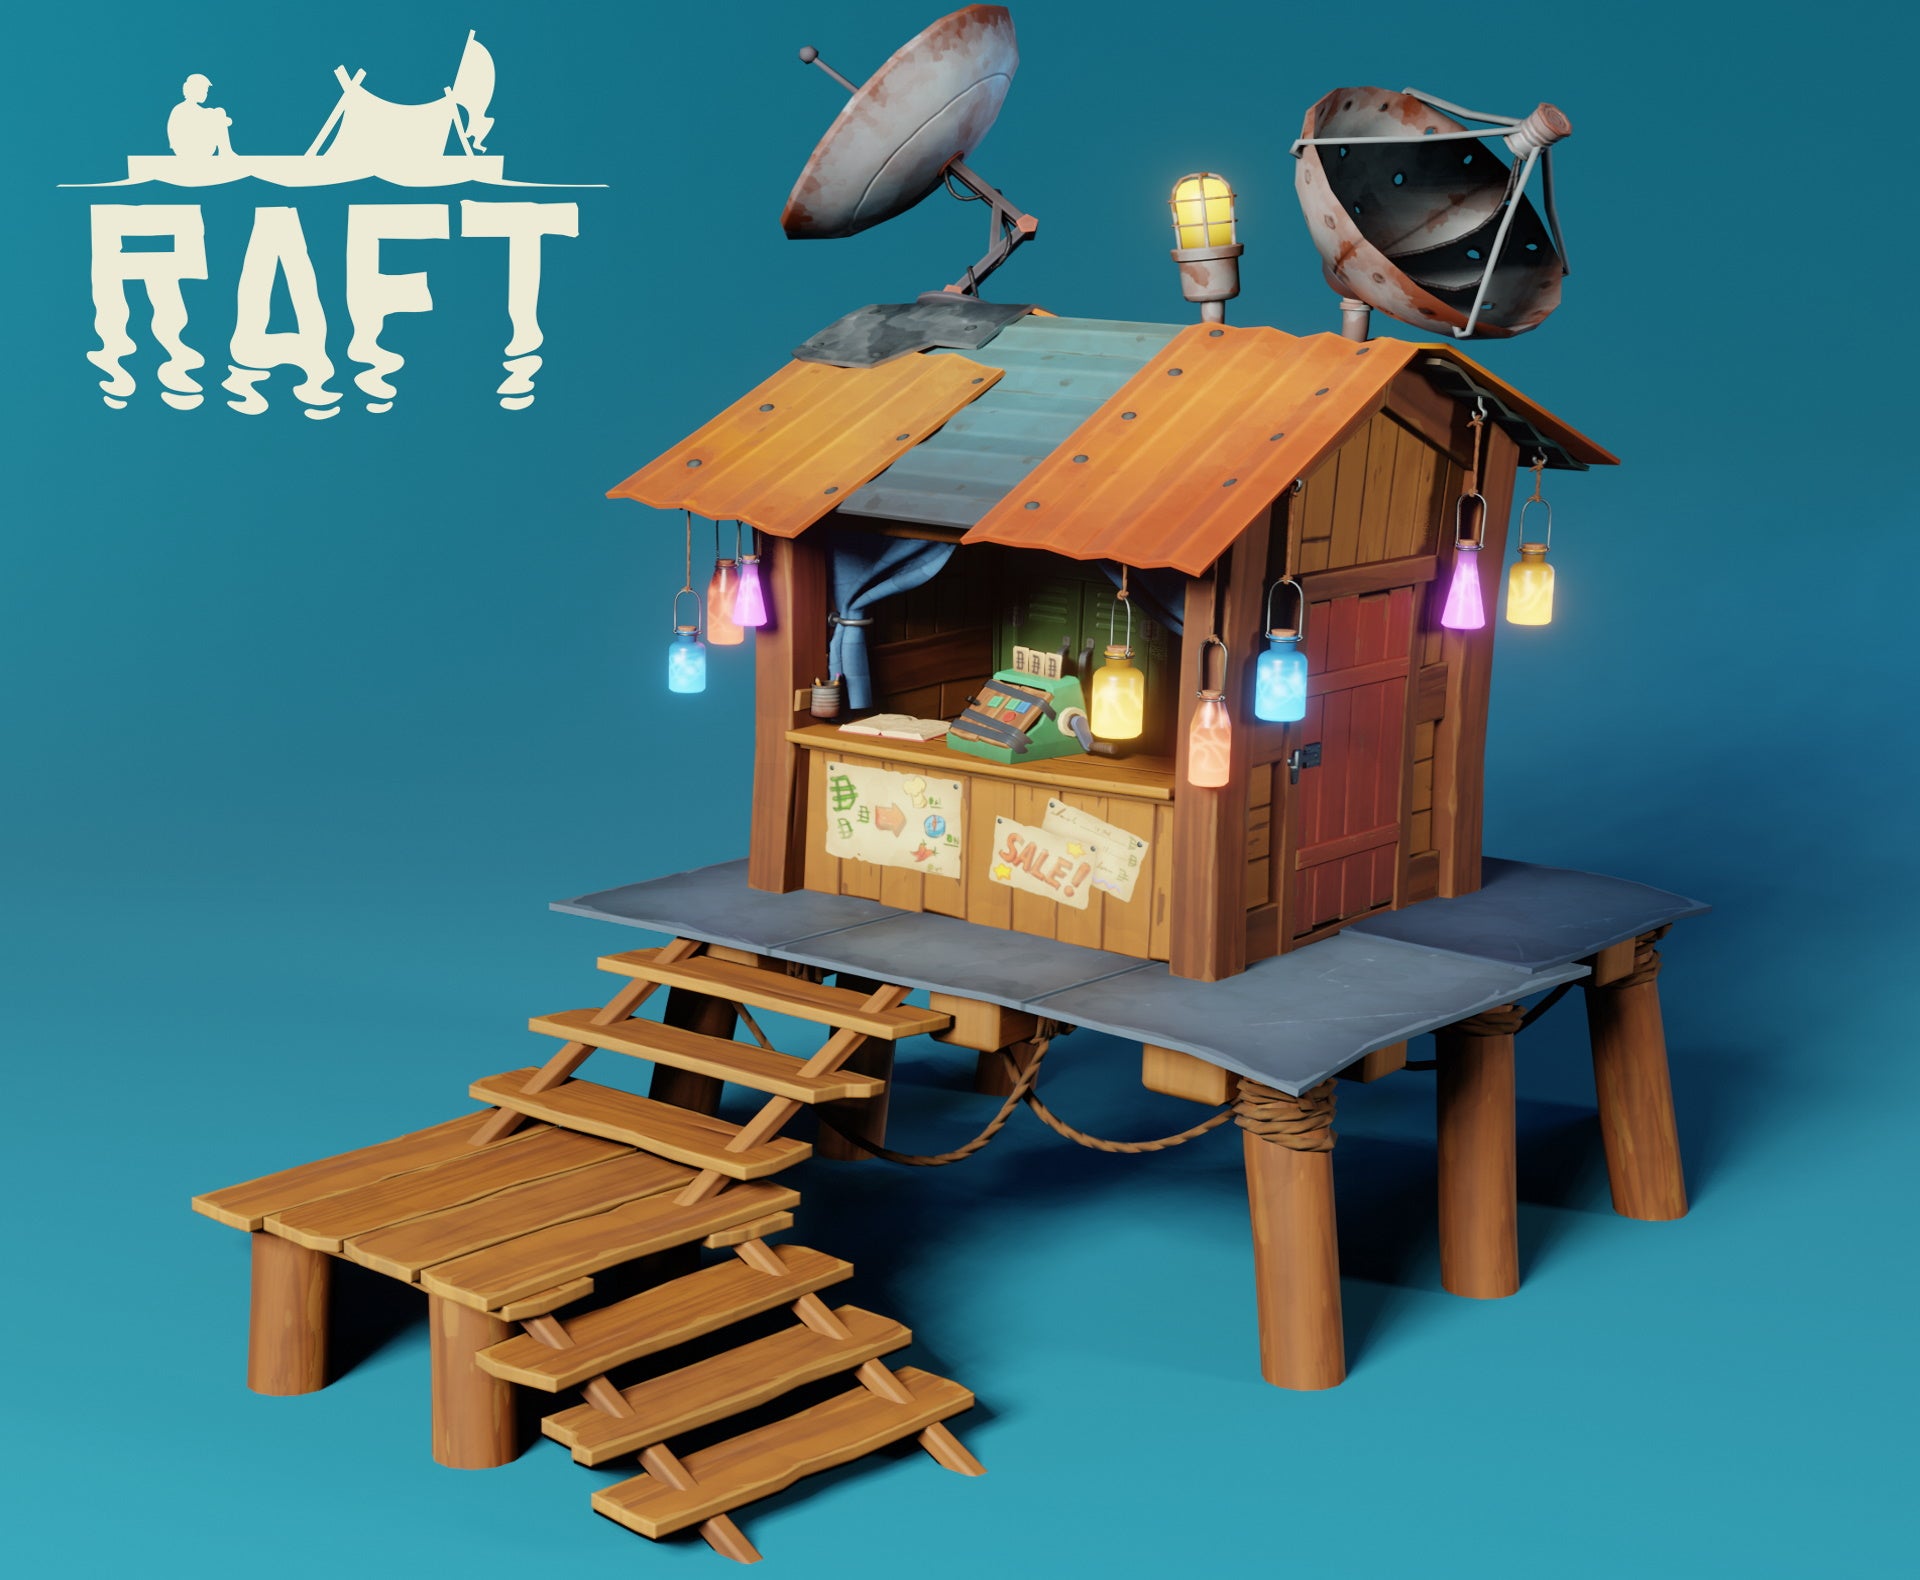 The Trading Post in Raft, where you spend Trash Cubes, sits against a blue background